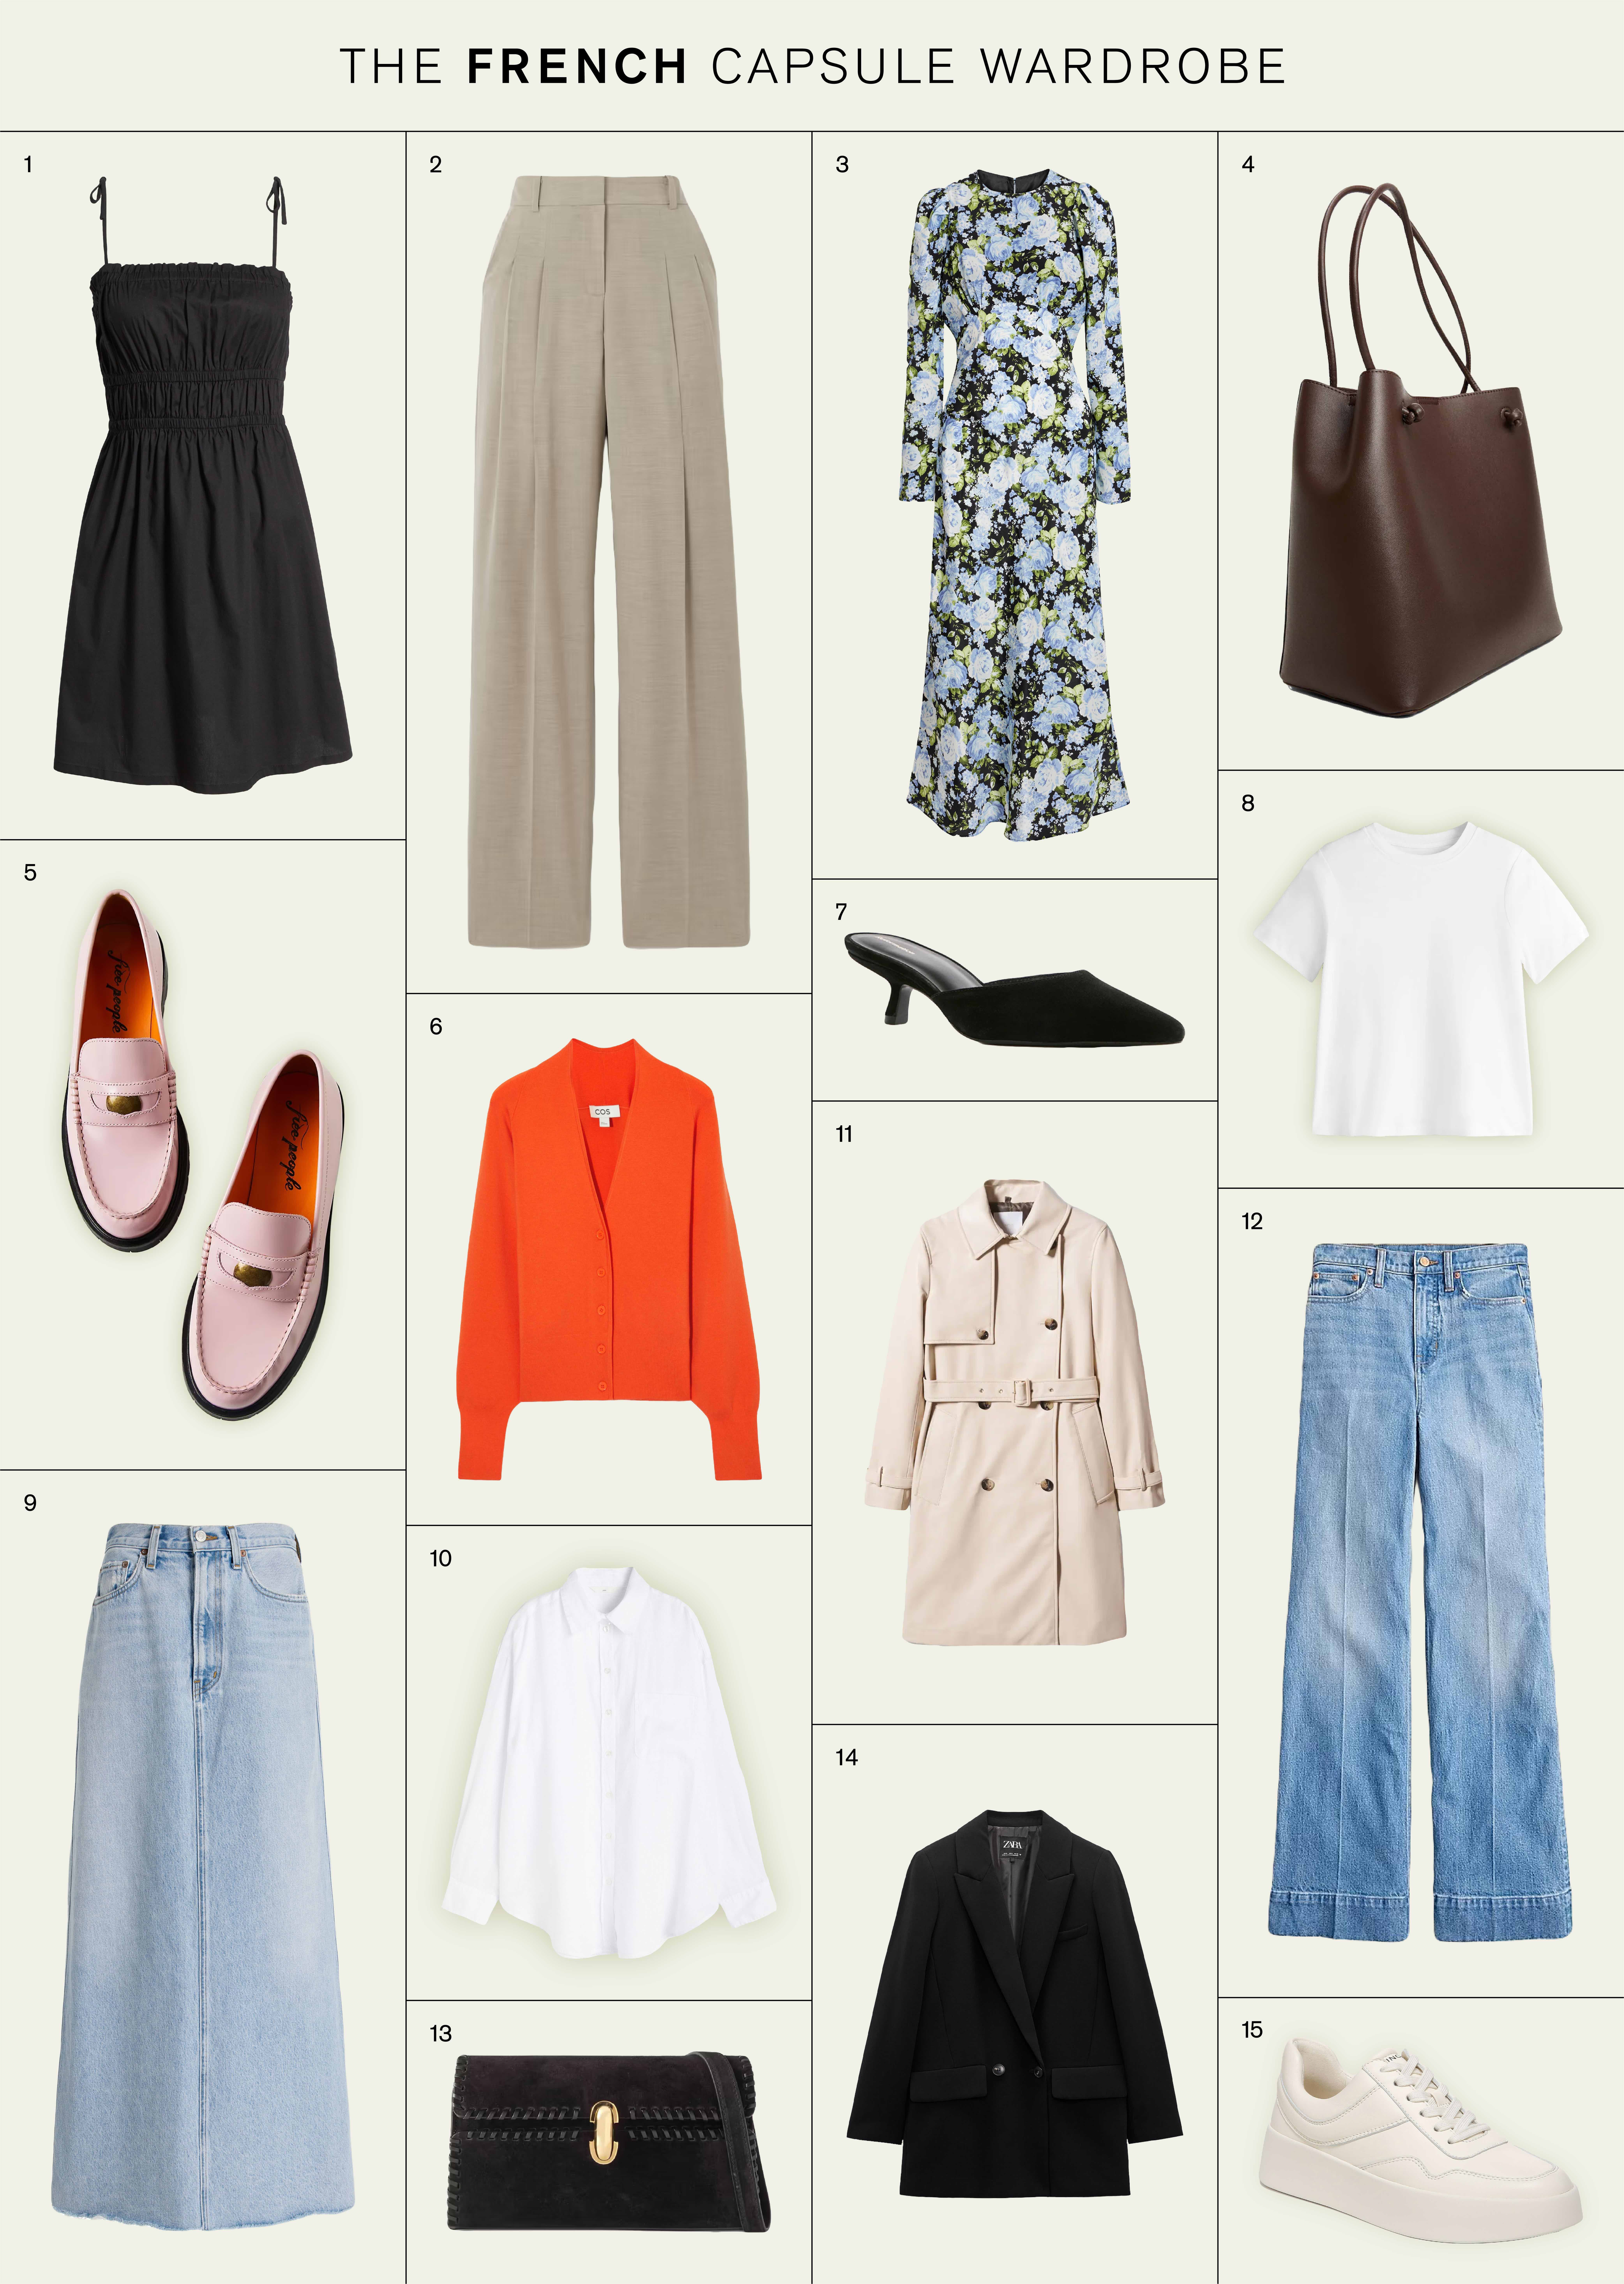 The 15Piece FrenchGirl Capsule Wardrobe to Pack for Paris Who What Wear